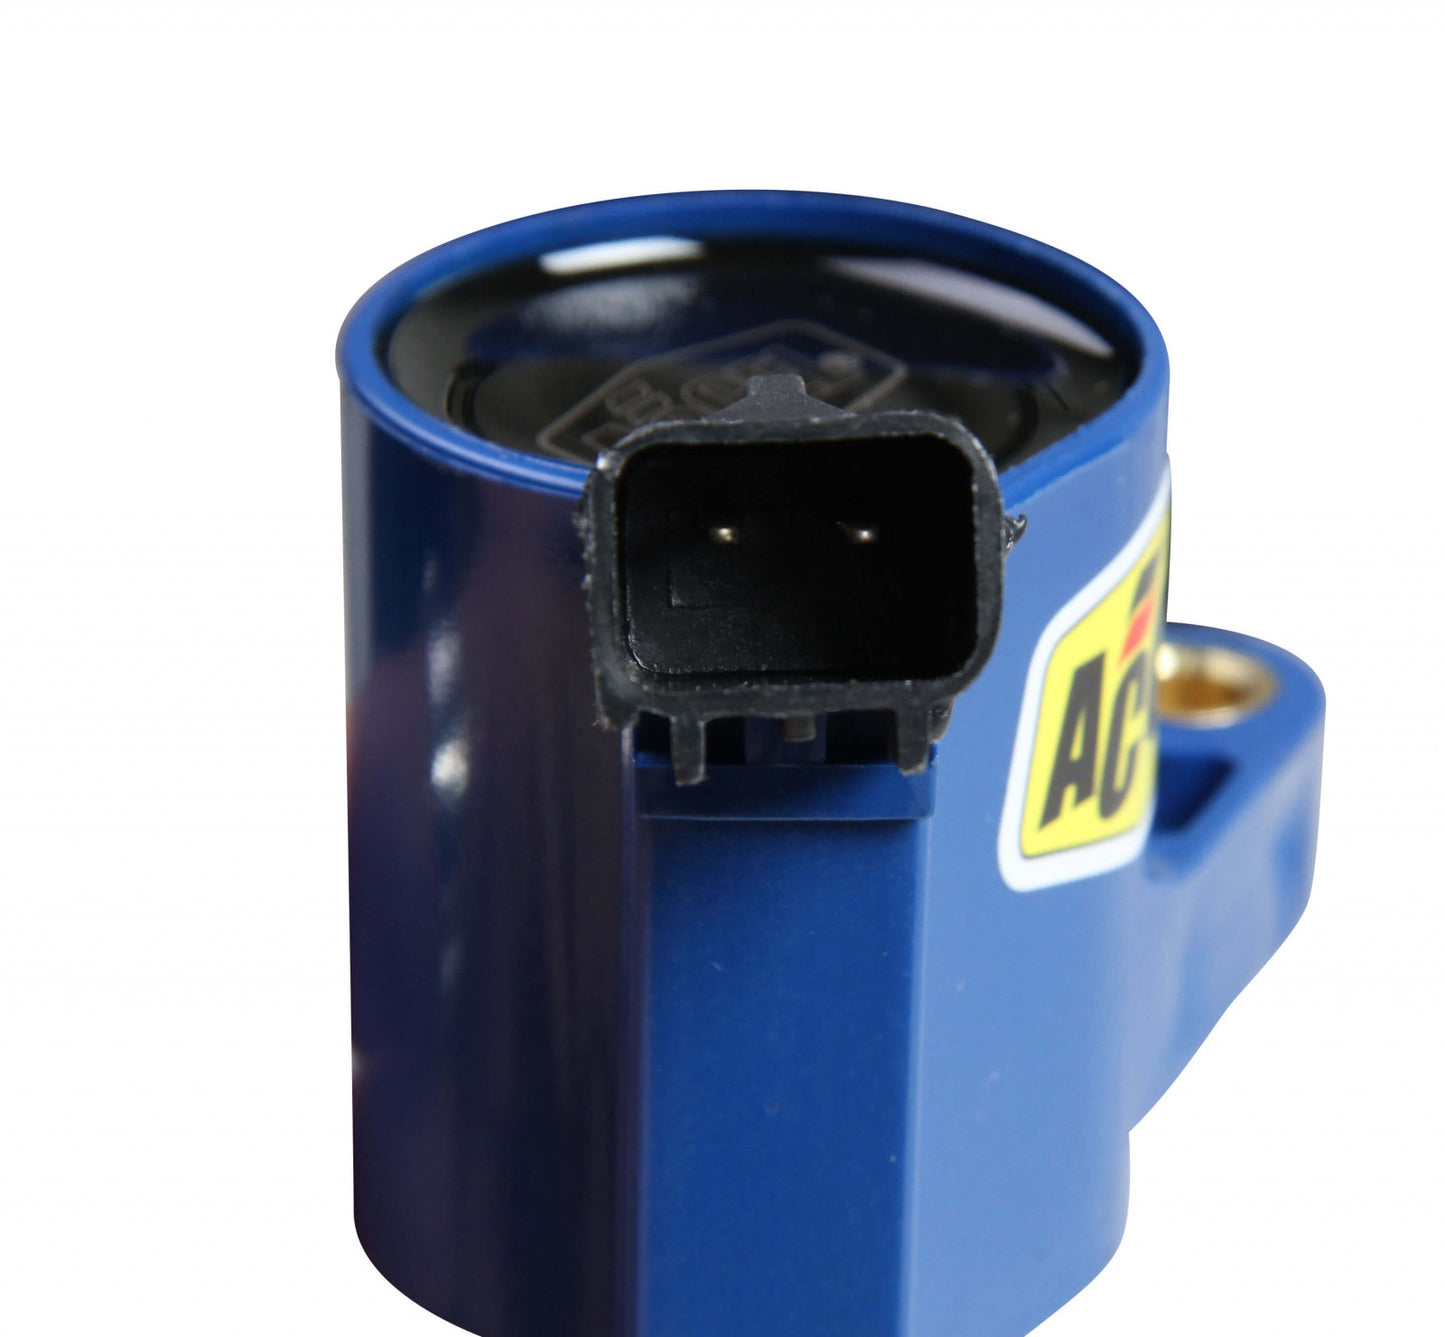 ACCEL Ignition Coil - SuperCoil - 1998-2008 Ford 4.6L/5.4L/6.8L 2-valve modular engines - Blue - Individual 140032B